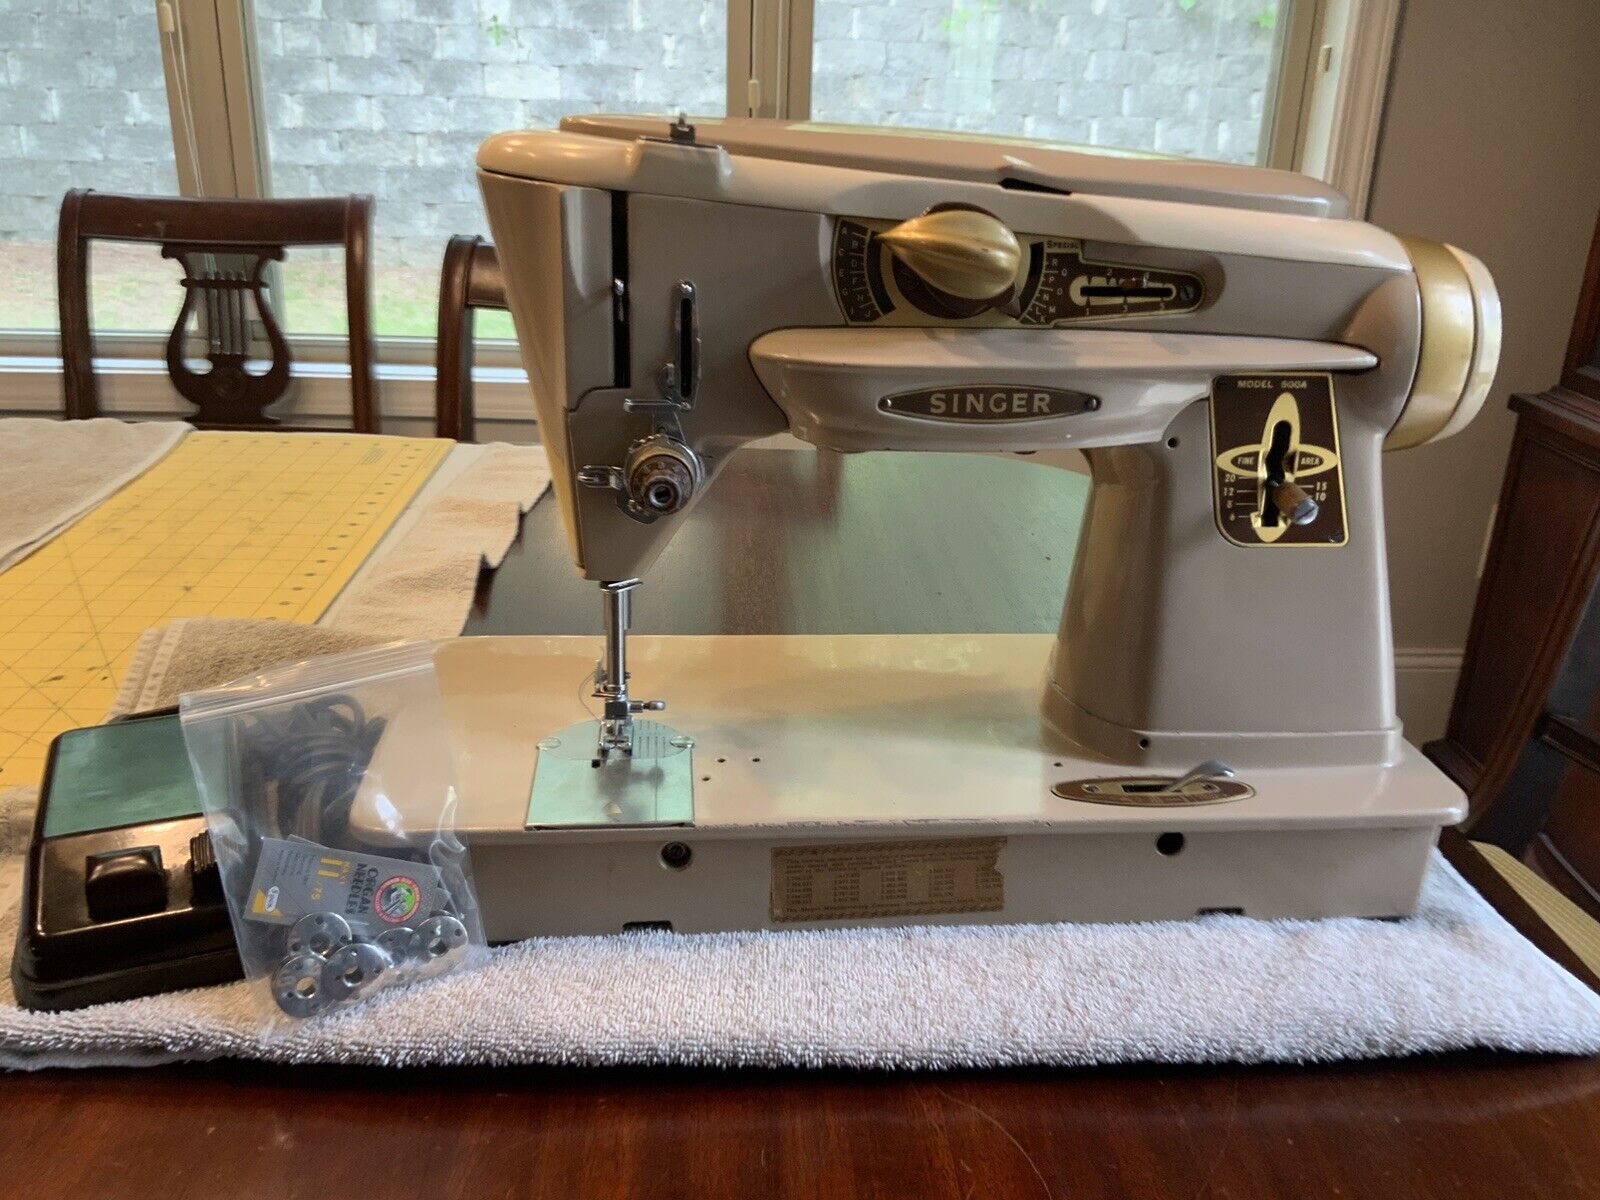 Singer 500a sewing machine cleaned and serviced Fair condition SN NC570554